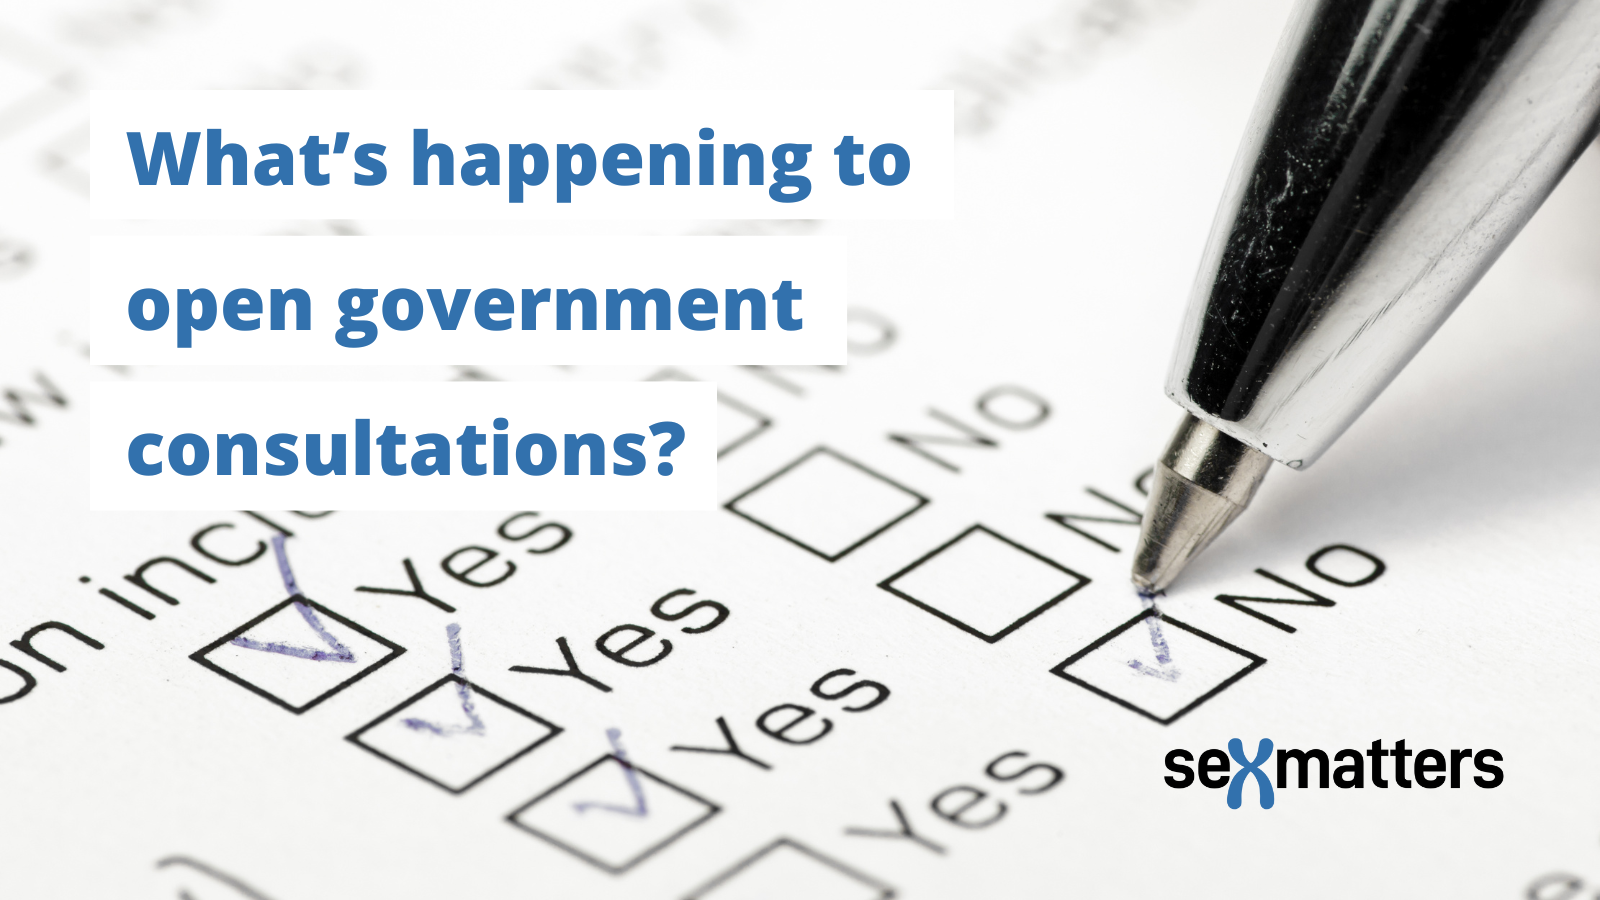 What's happening to open government consultations